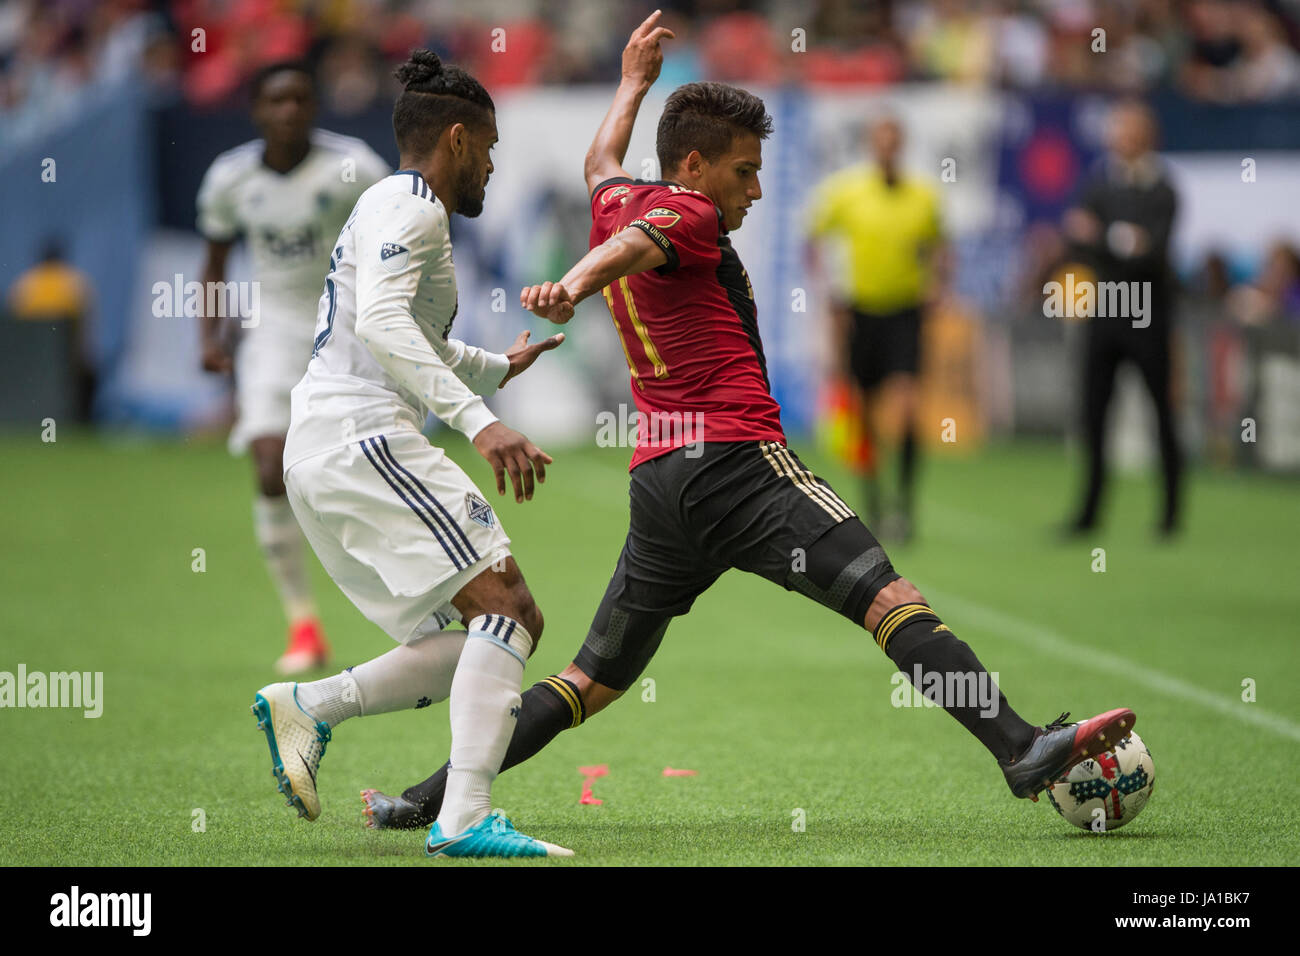 Vancouver, Canada. 3 June 2017. Yamil Asad (11) of Atlanta United playing the ball. Vancouver defeat Atlanta 3-1. Vancouver Whitecaps vs Atlanta United BC Place Stadium.  © Gerry Rousseau/Alamy Live News Stock Photo